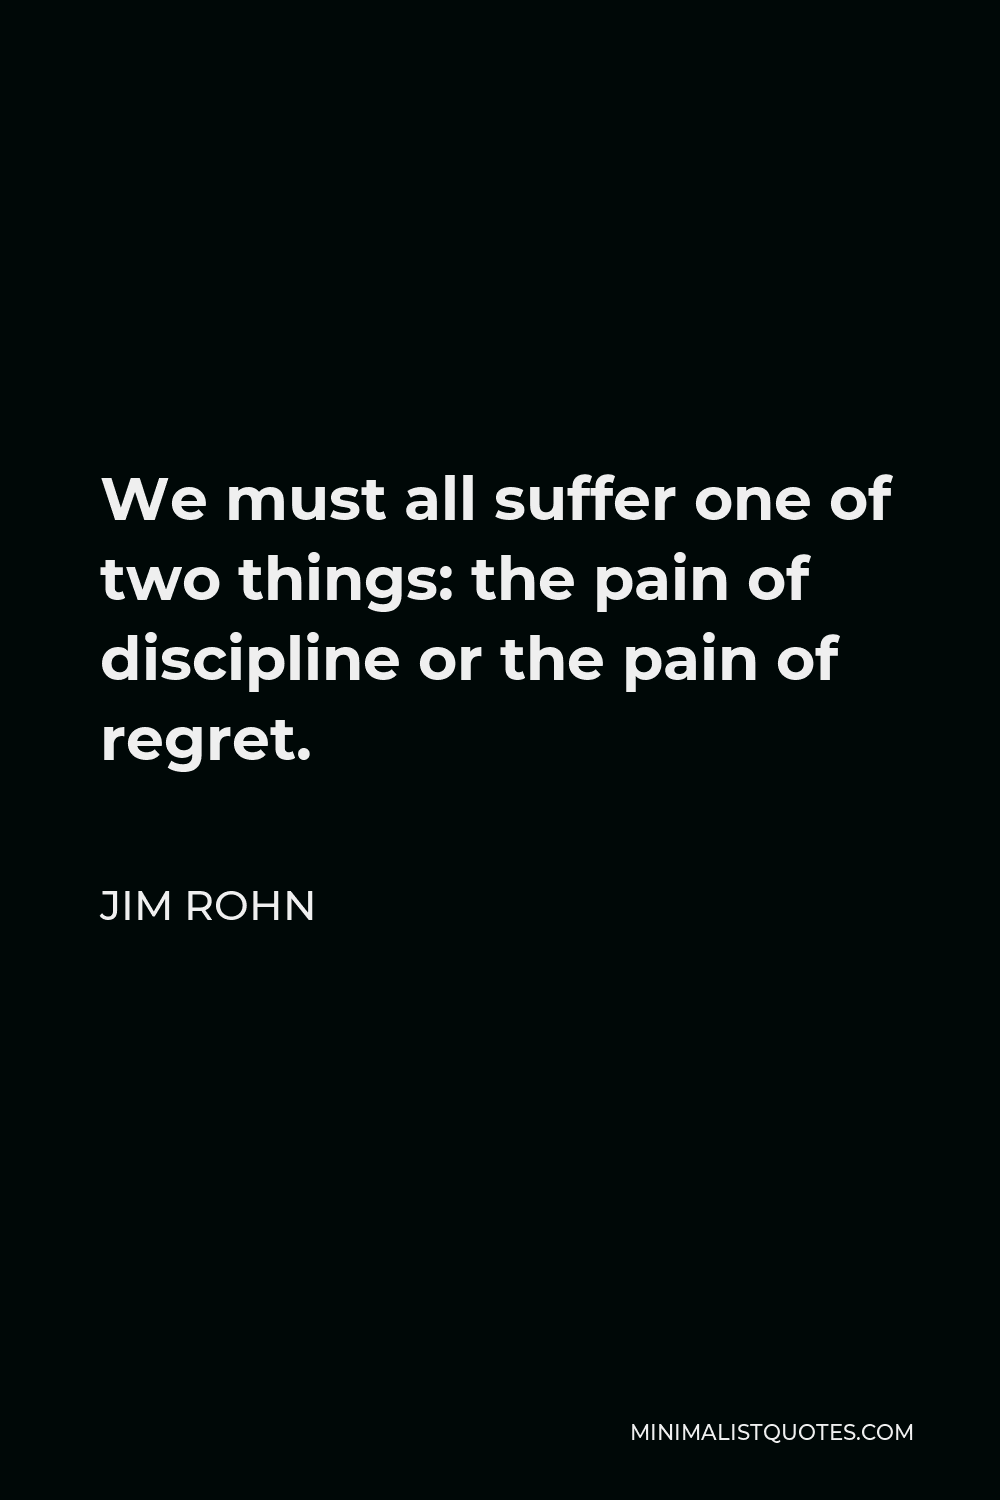 Jim Rohn Quote - We must all suffer one of two things: the pain of discipline or the pain of regret.